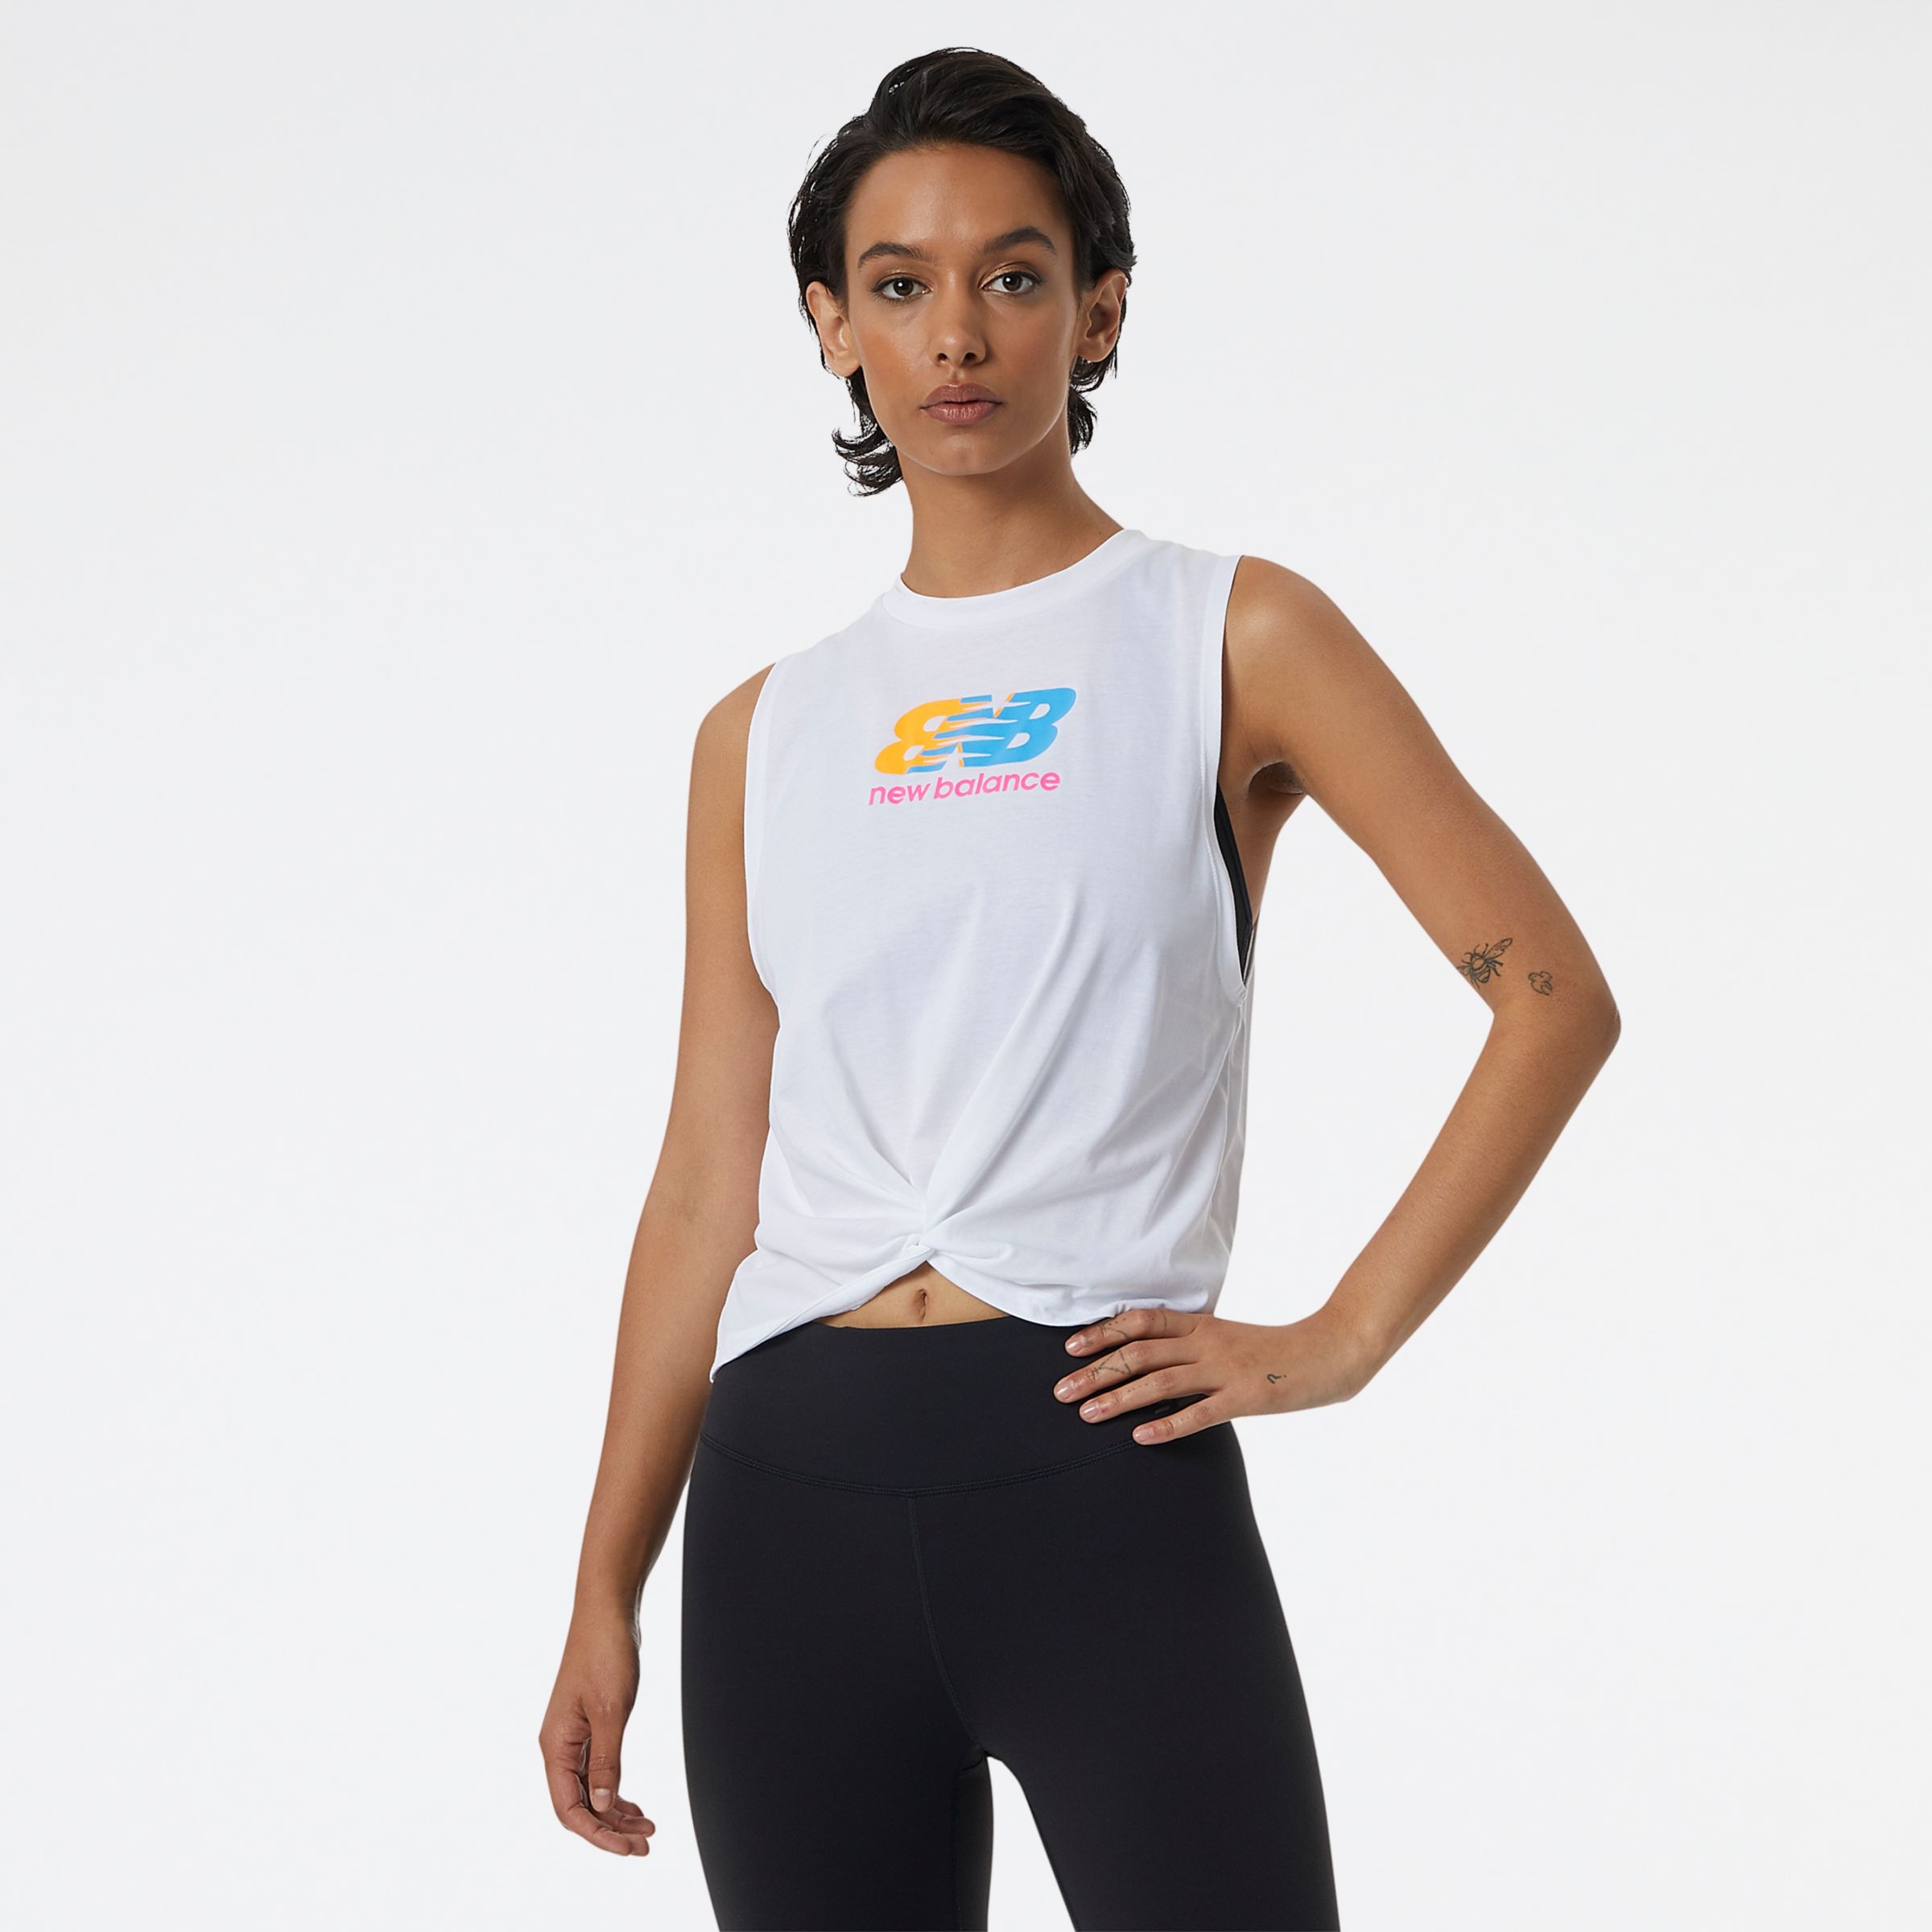 New Balance Musculosa Relentless Graphic Tank WT21171, , large